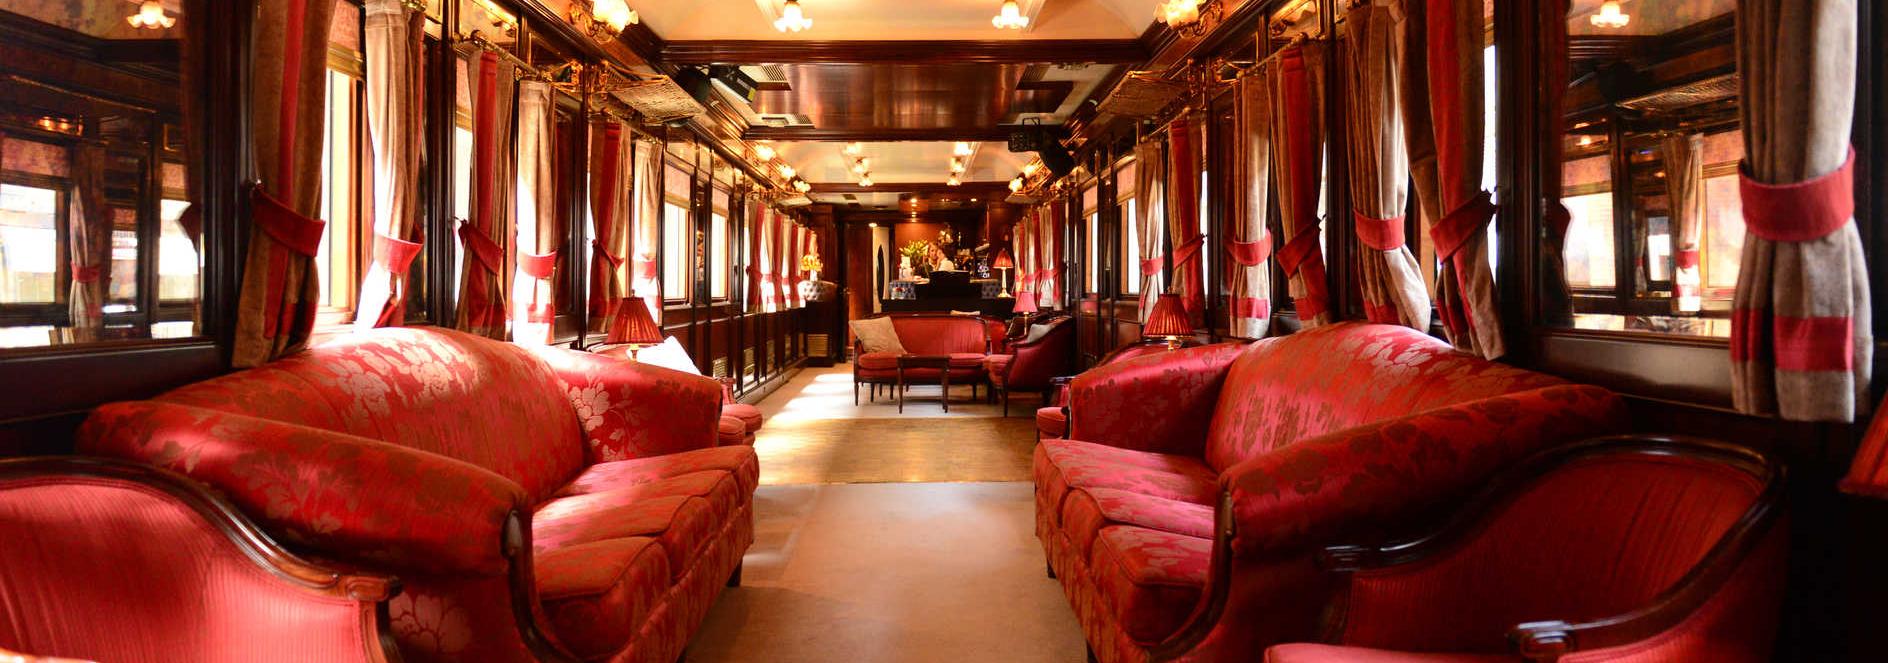 A journey on board the Al Andalus train